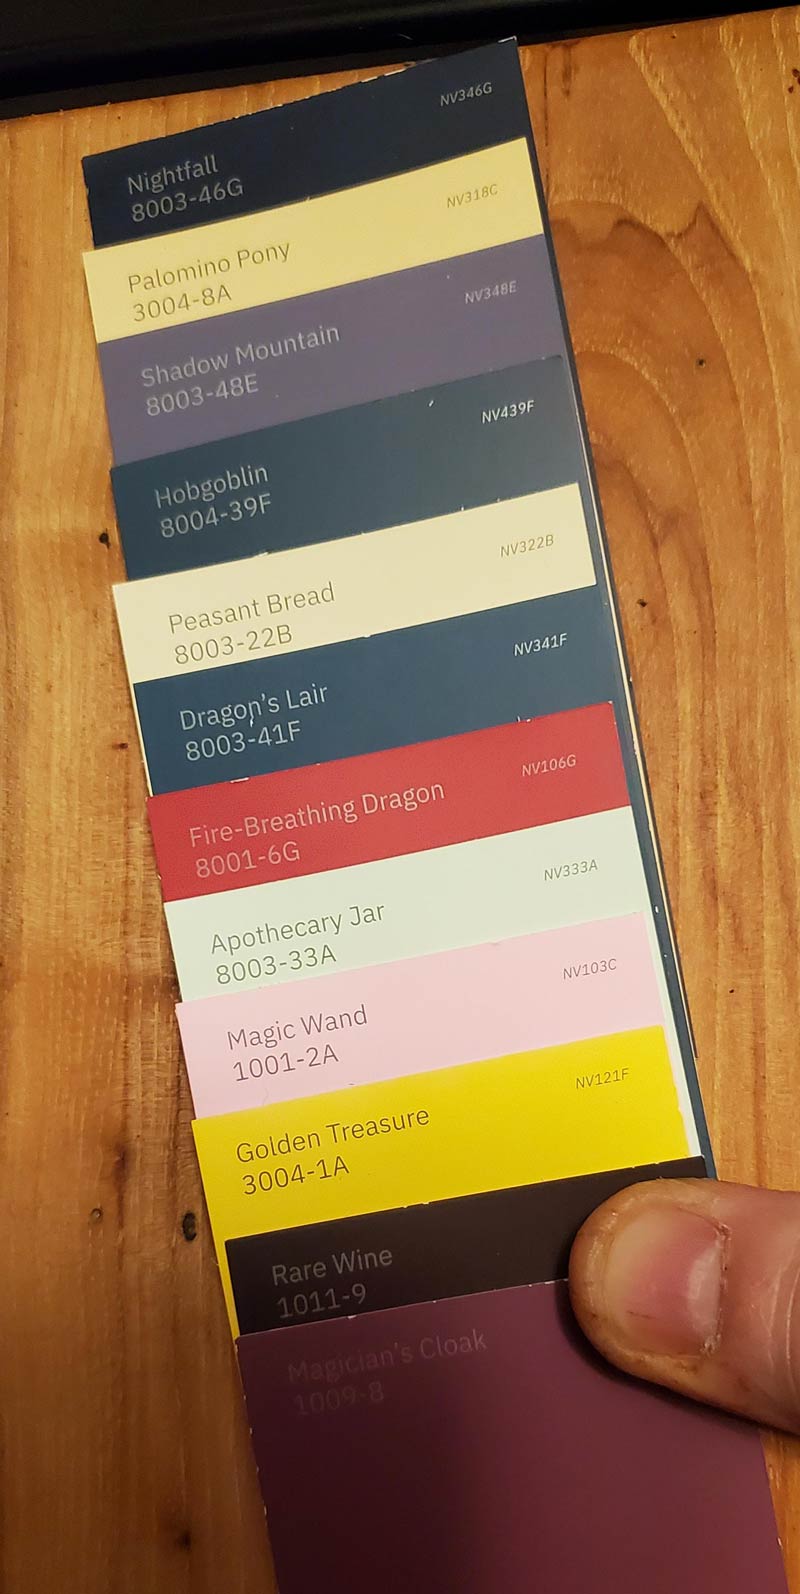 Took my son to pick out a new color for his room and walked away with a pretty solid D&D campaign